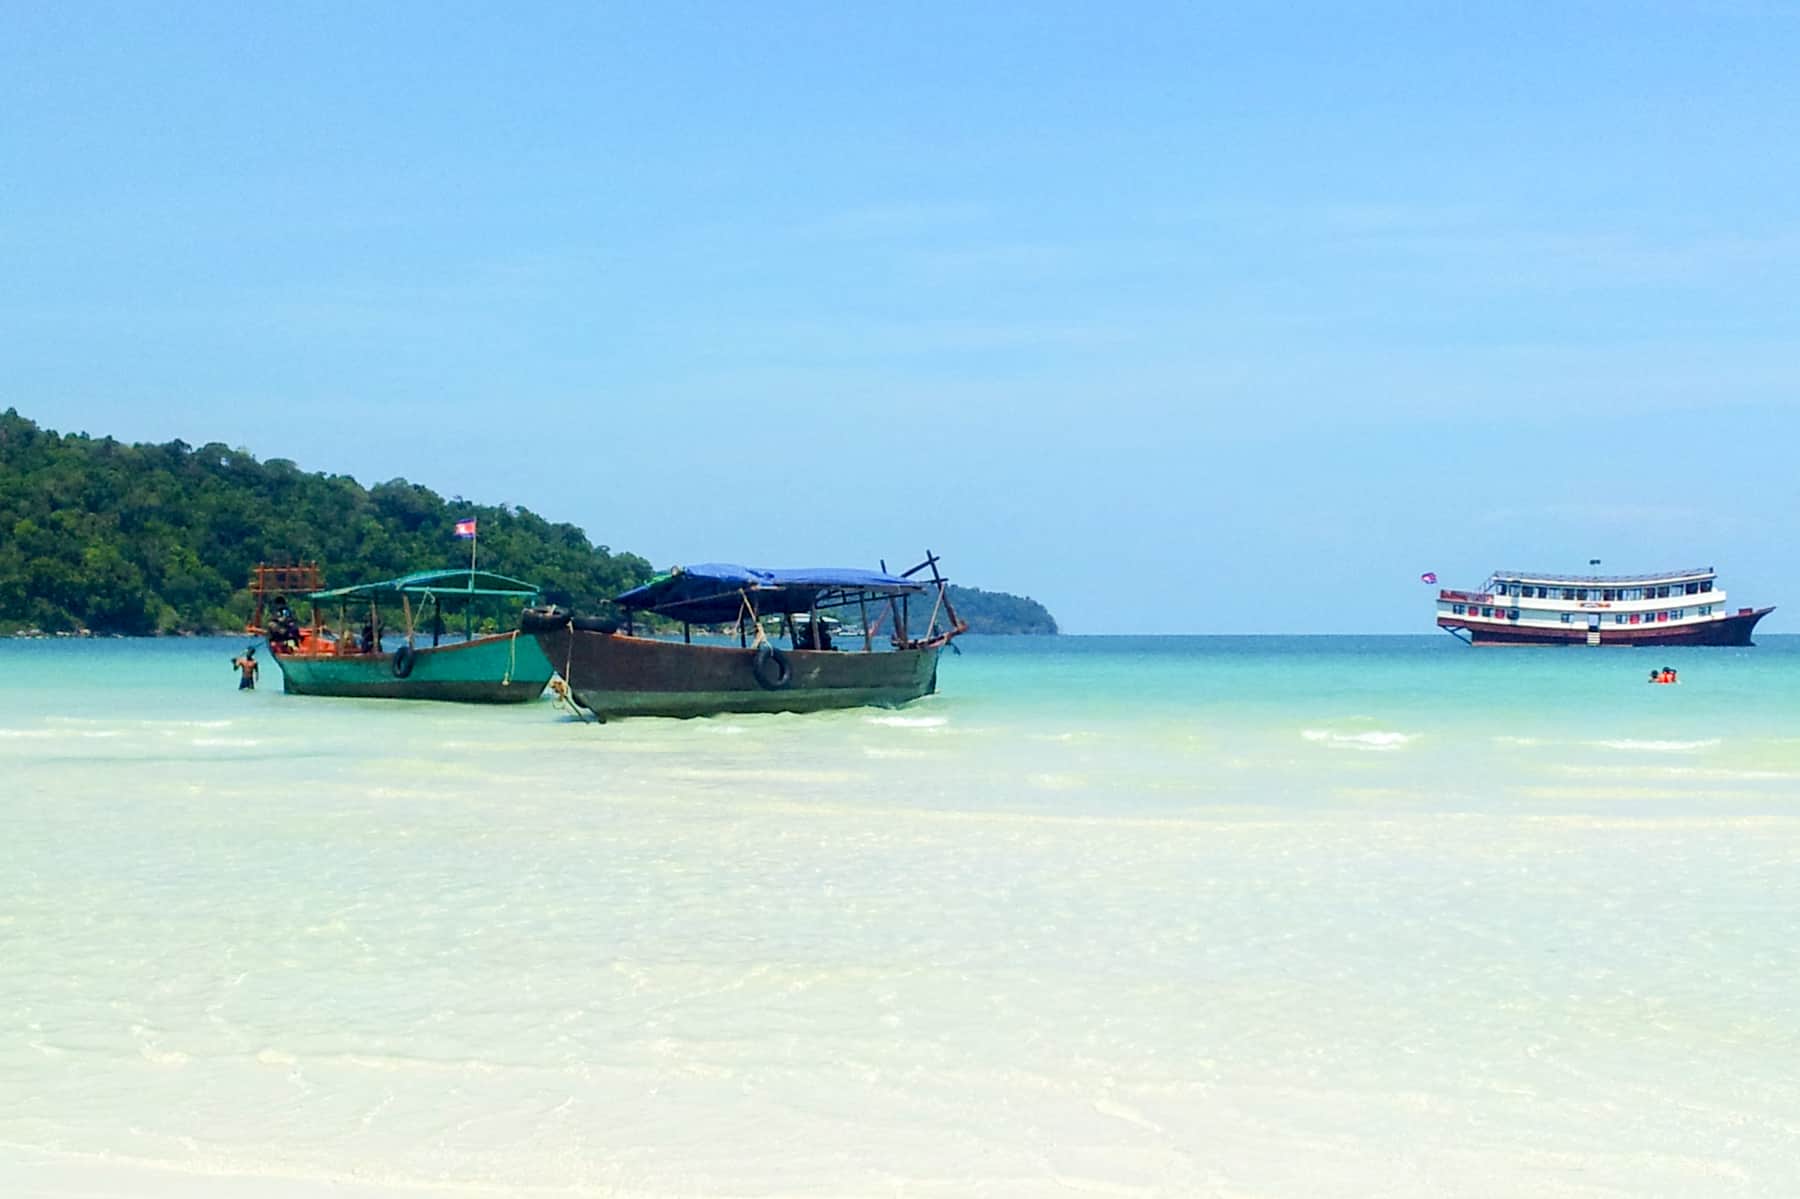 Two wooden passenger boats dock on the white sand shoreline of Koh Rong Samloem island, while another boat floats in the distance